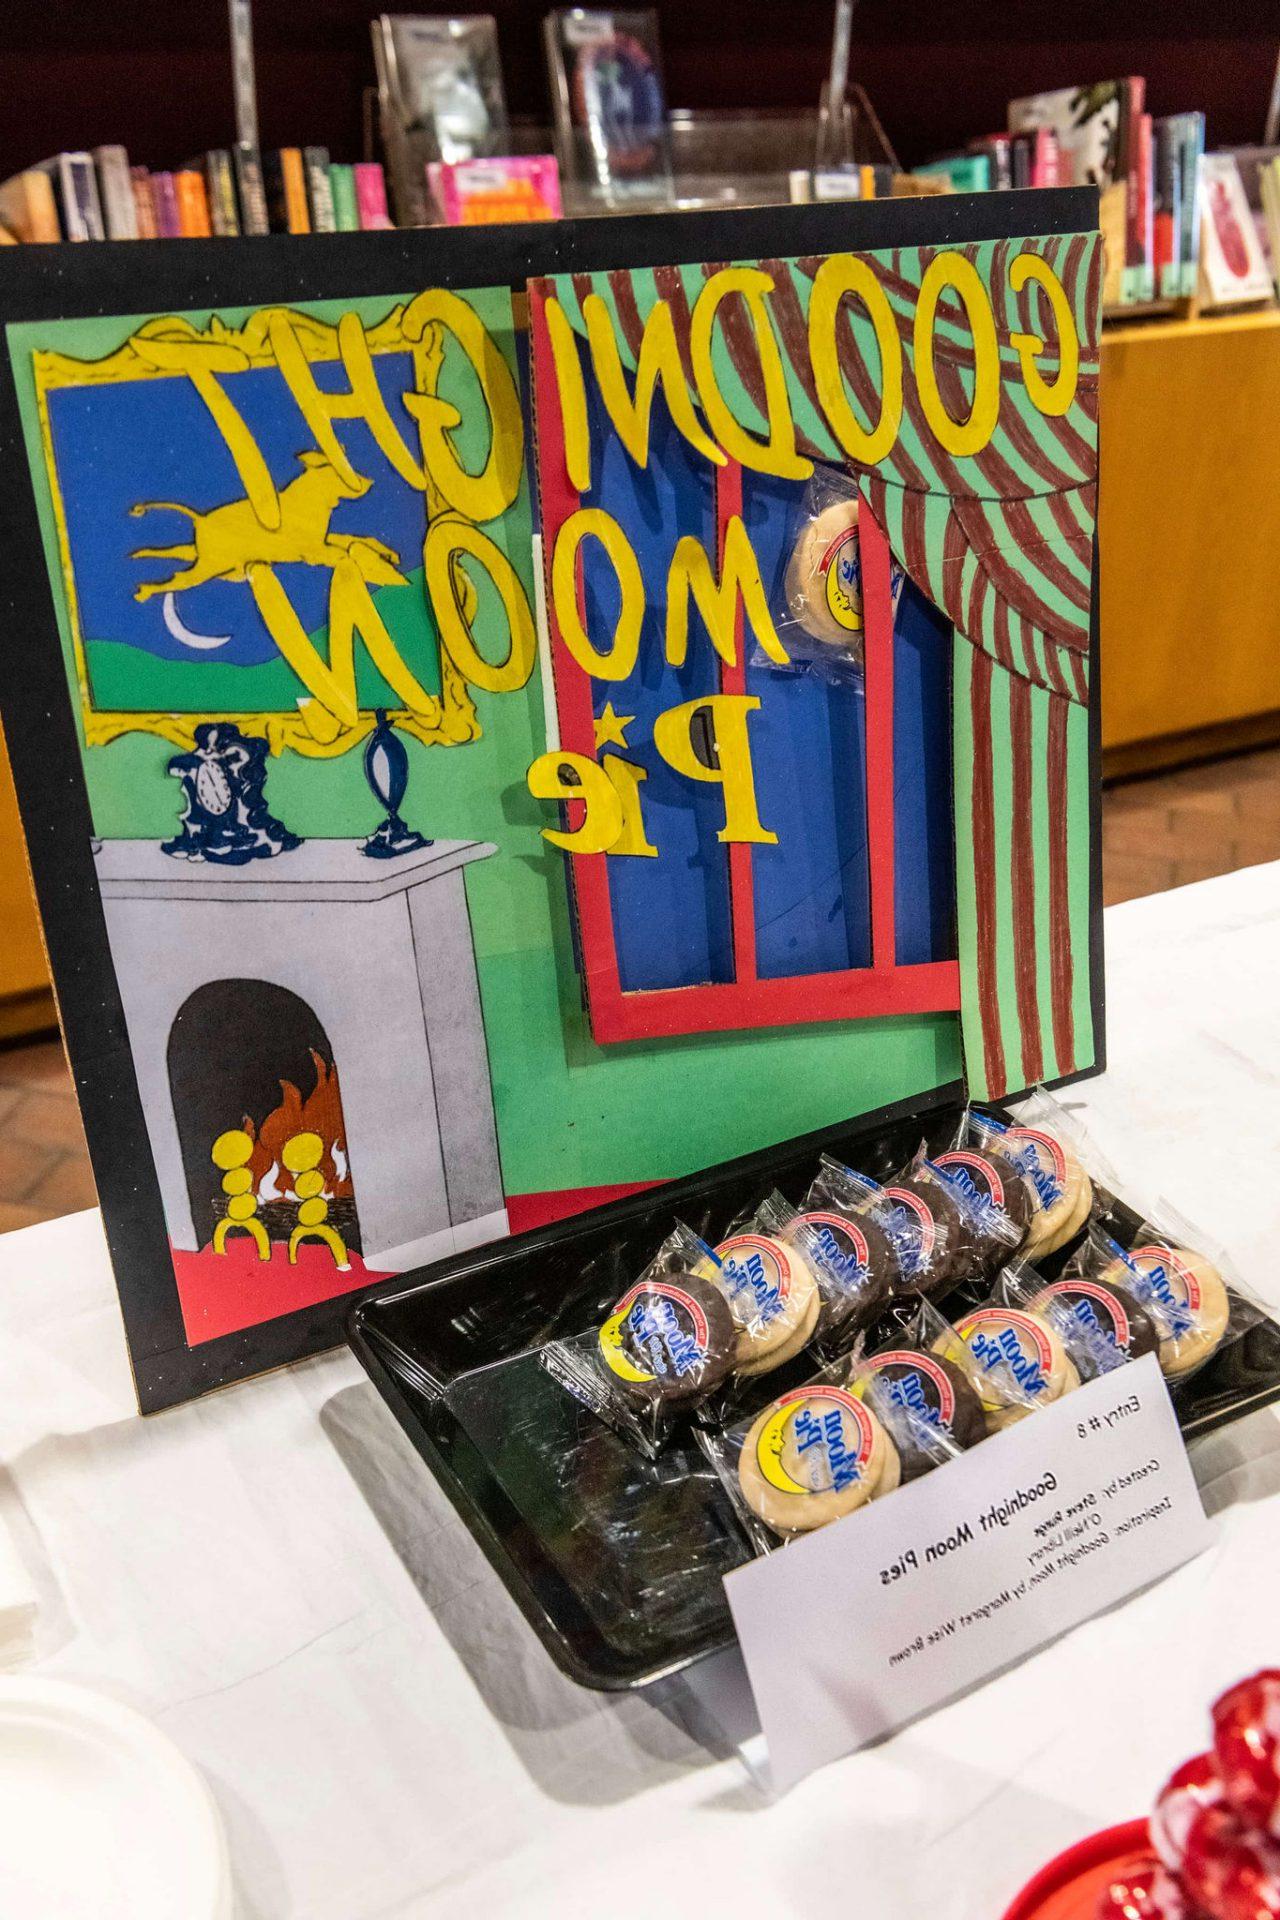 A takeoff on the cover of "Goodnight Moon," changed to "Goodnight Moon Pies" with moon pie cakes next to it